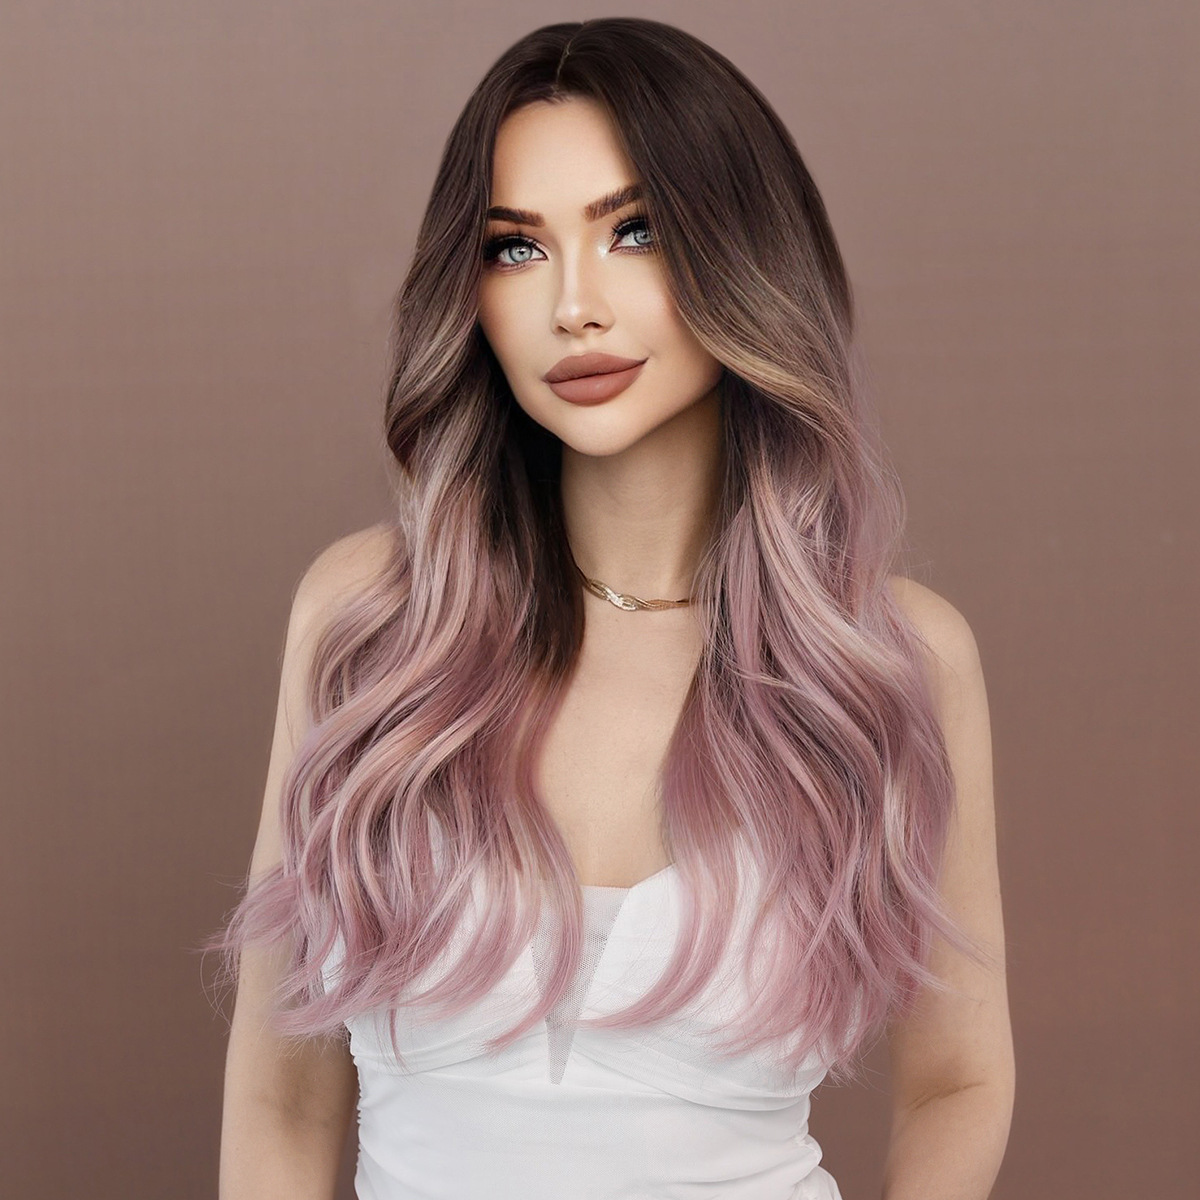 A stylish synthetic wig in light purple with long wavy hair, ready to go